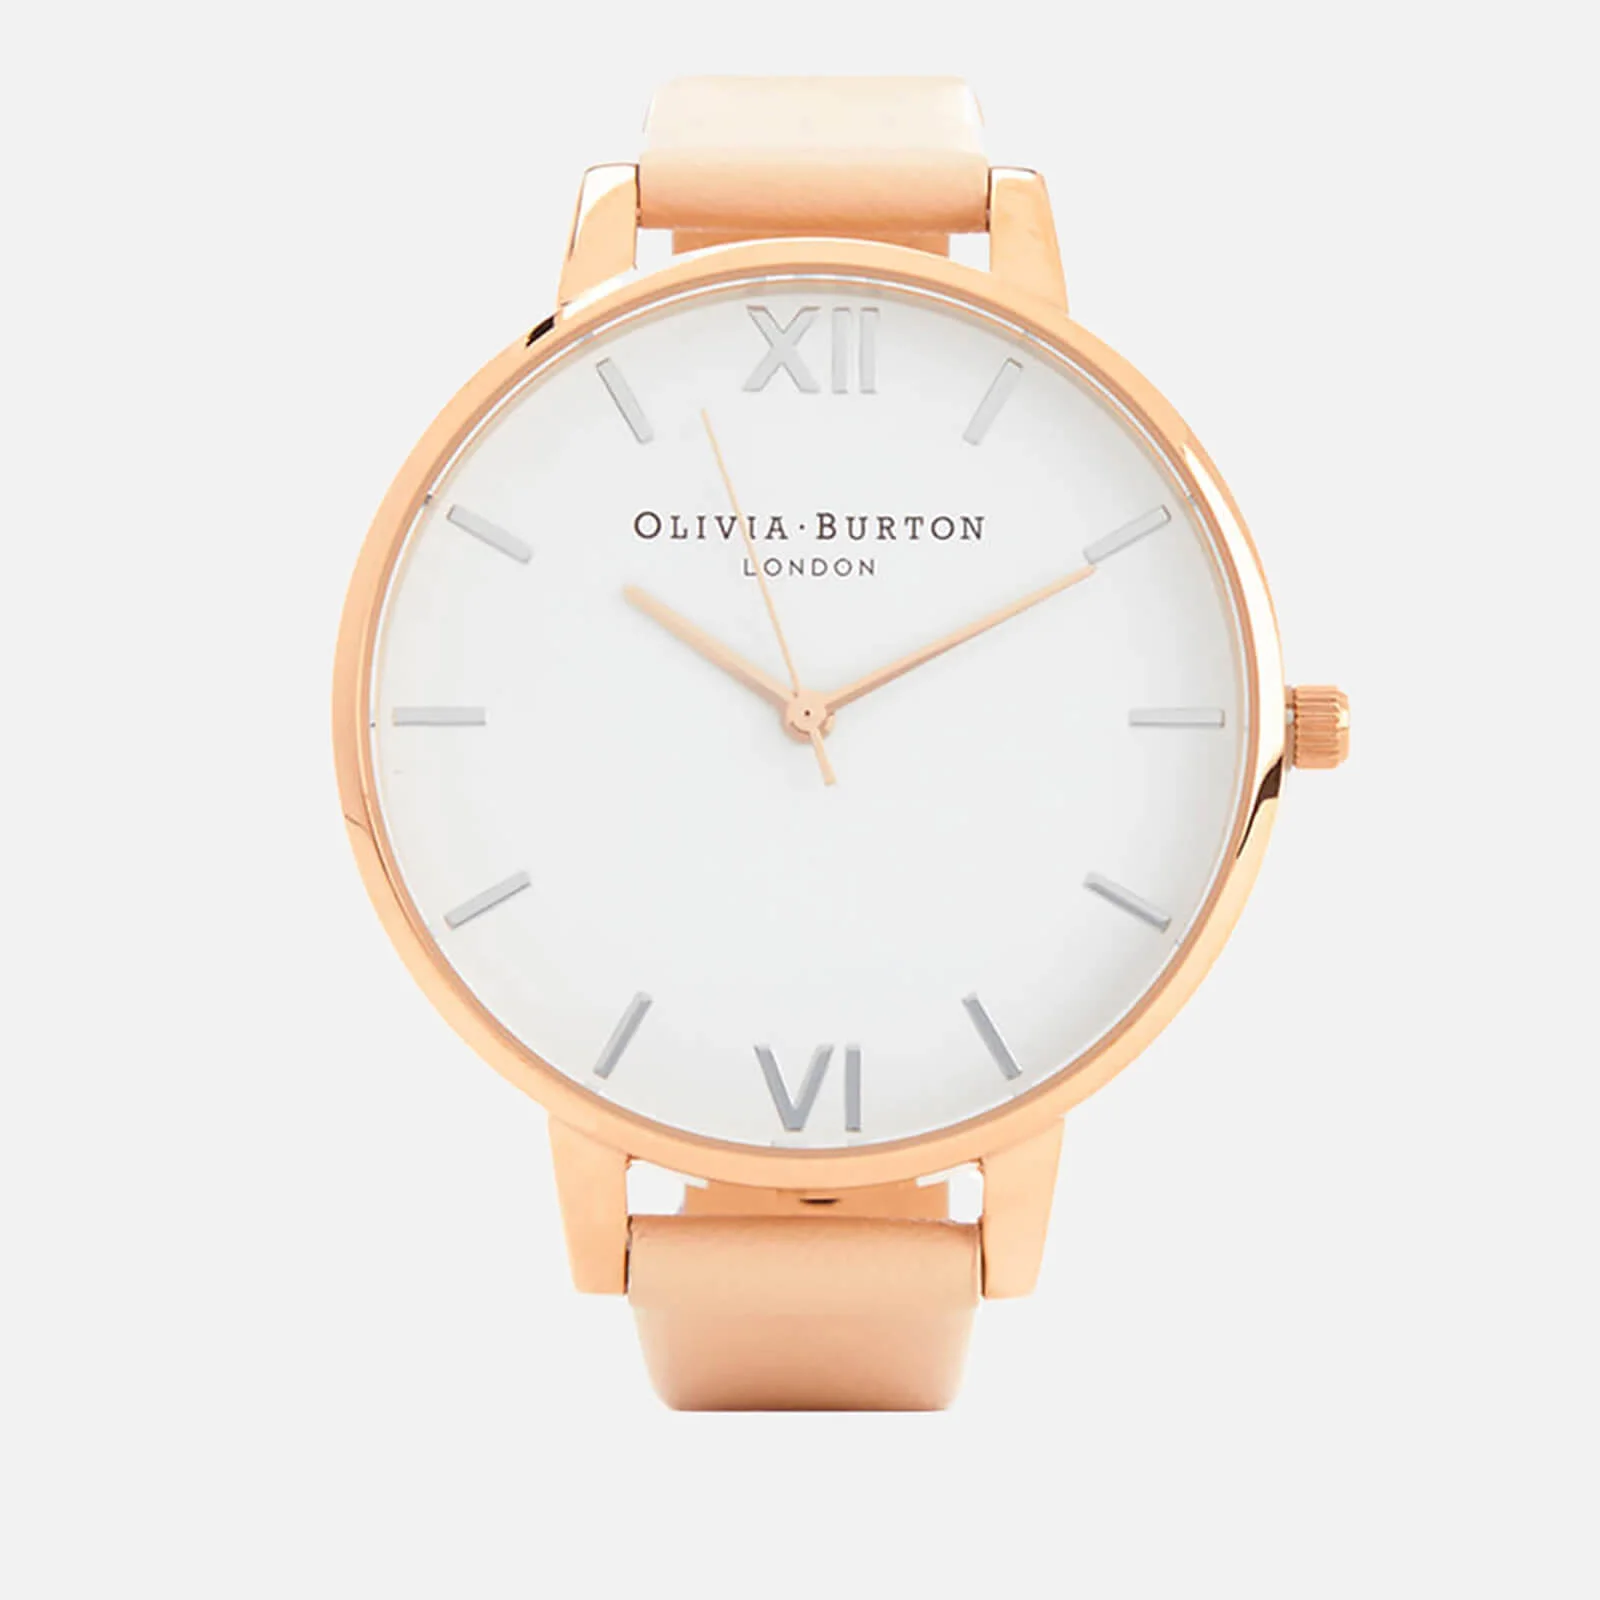 Olivia Burton Women's White Dial Big Dial Watch - Nude Peach and Rose Gold Image 1